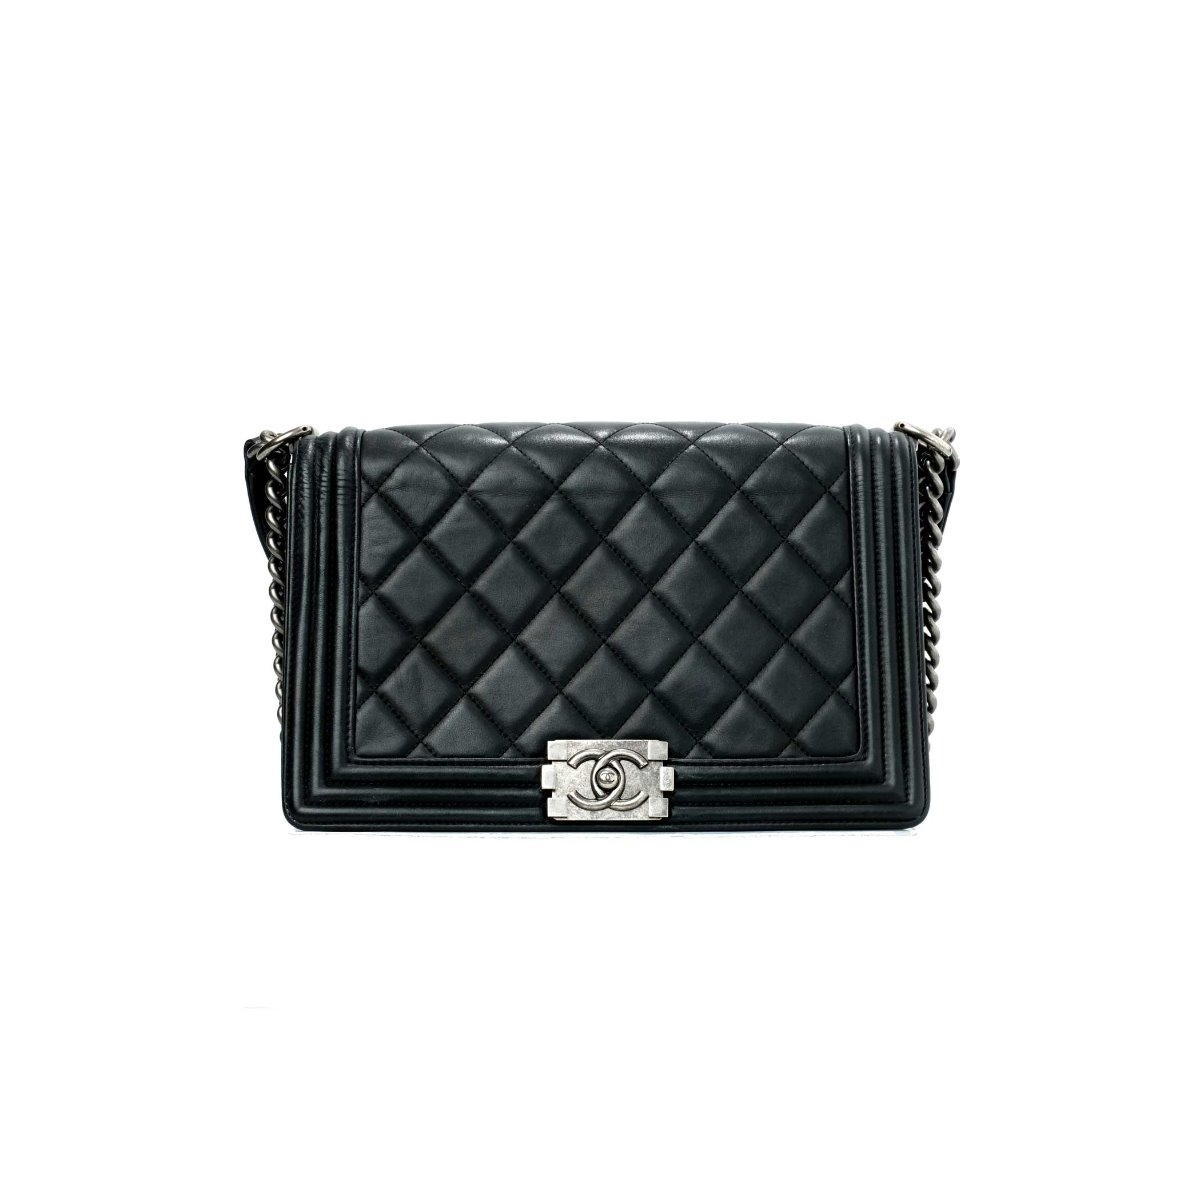 Chanel Large Stitch Boy Bag at the best price